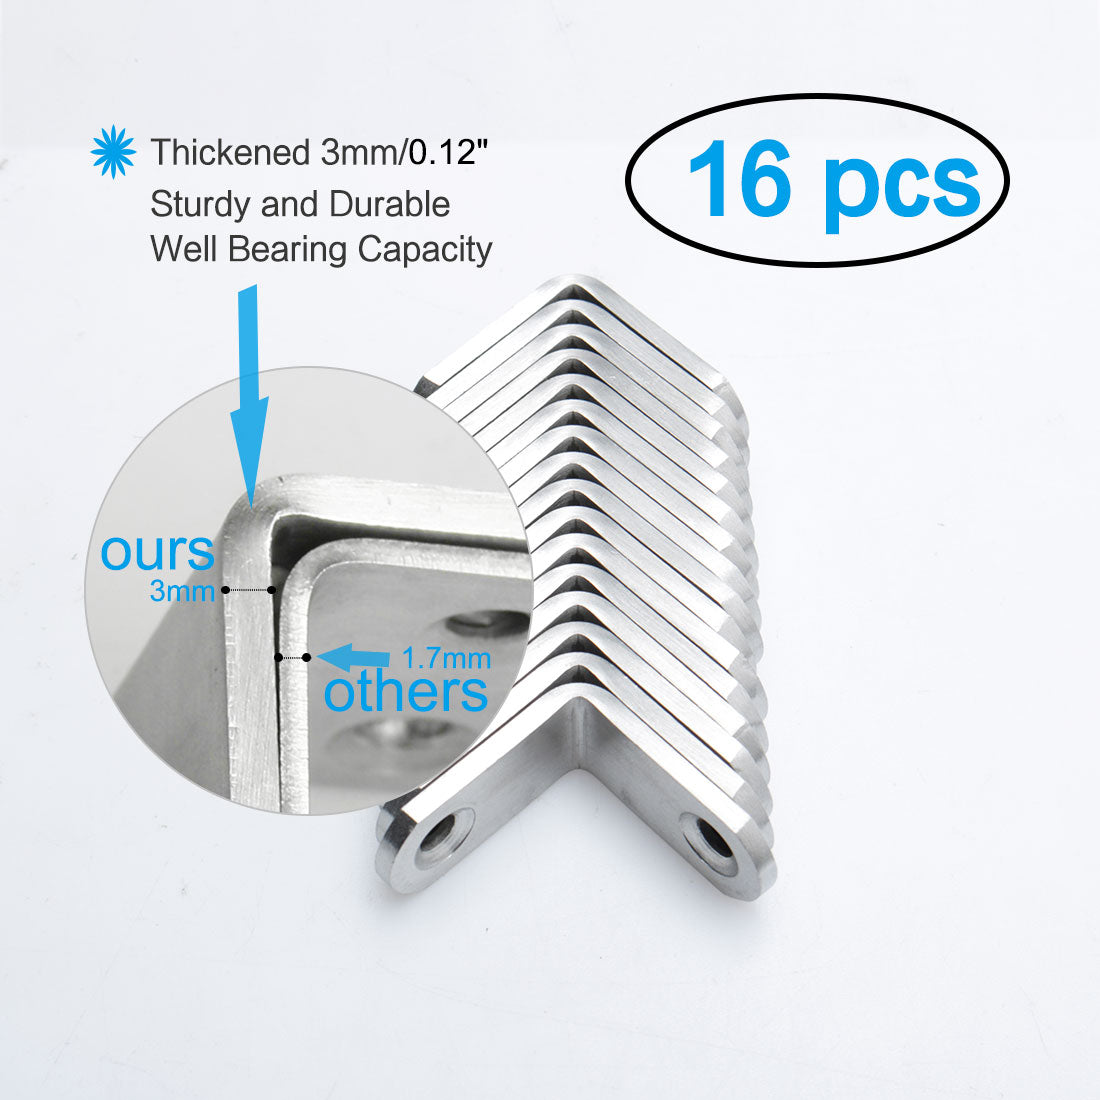 uxcell Uxcell Angle Bracket Stainless Steel Brace Fastener Support w Screws 30 x 30mm, 16pcs